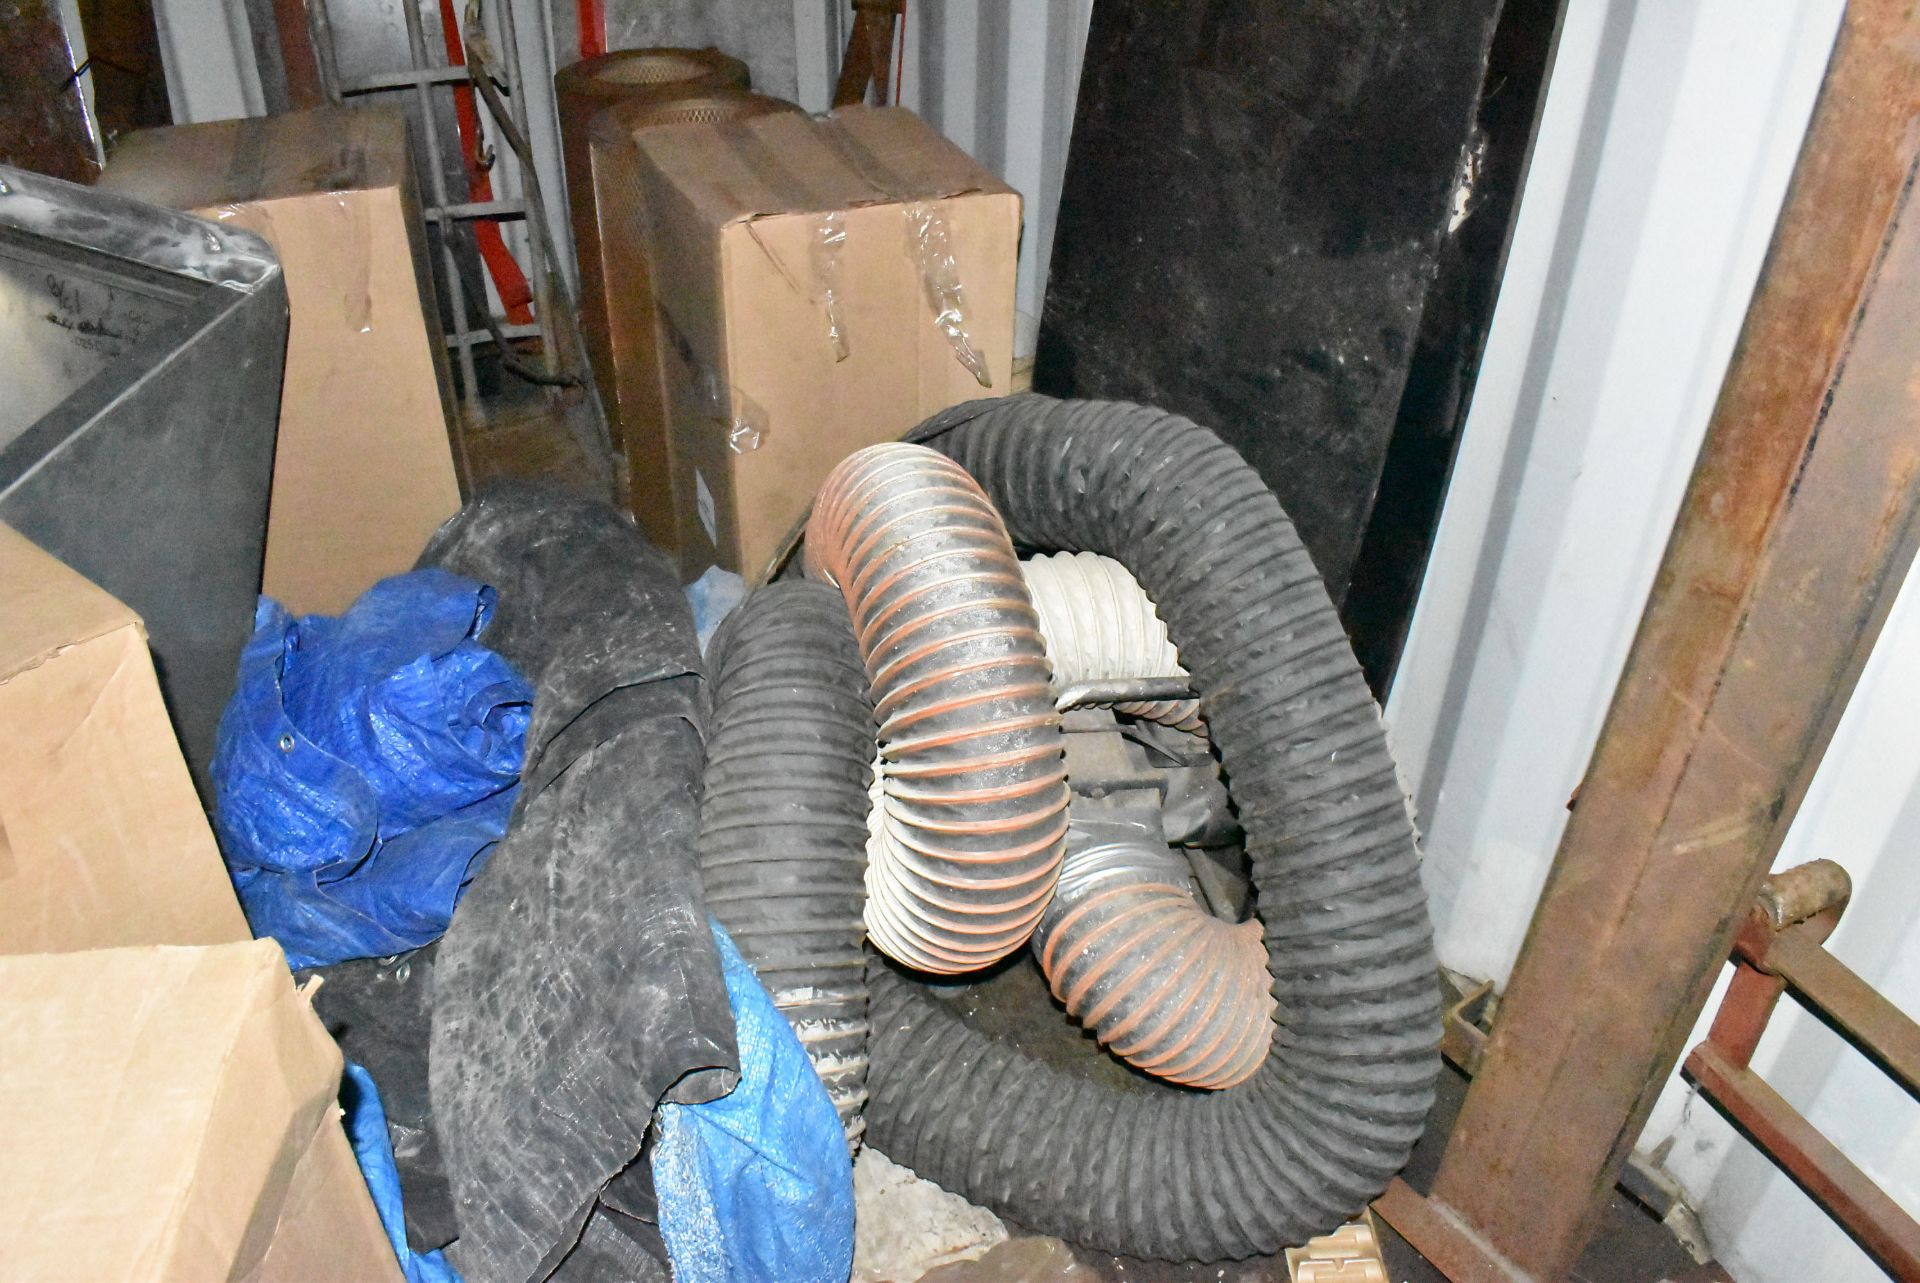 LOT/ REMAINING CONTENTS OF CONTAINER CONSISTING OF SPARE PARTS, FLY WHEELS, WIRE, ROLLERS AND BUCKET - Image 2 of 8